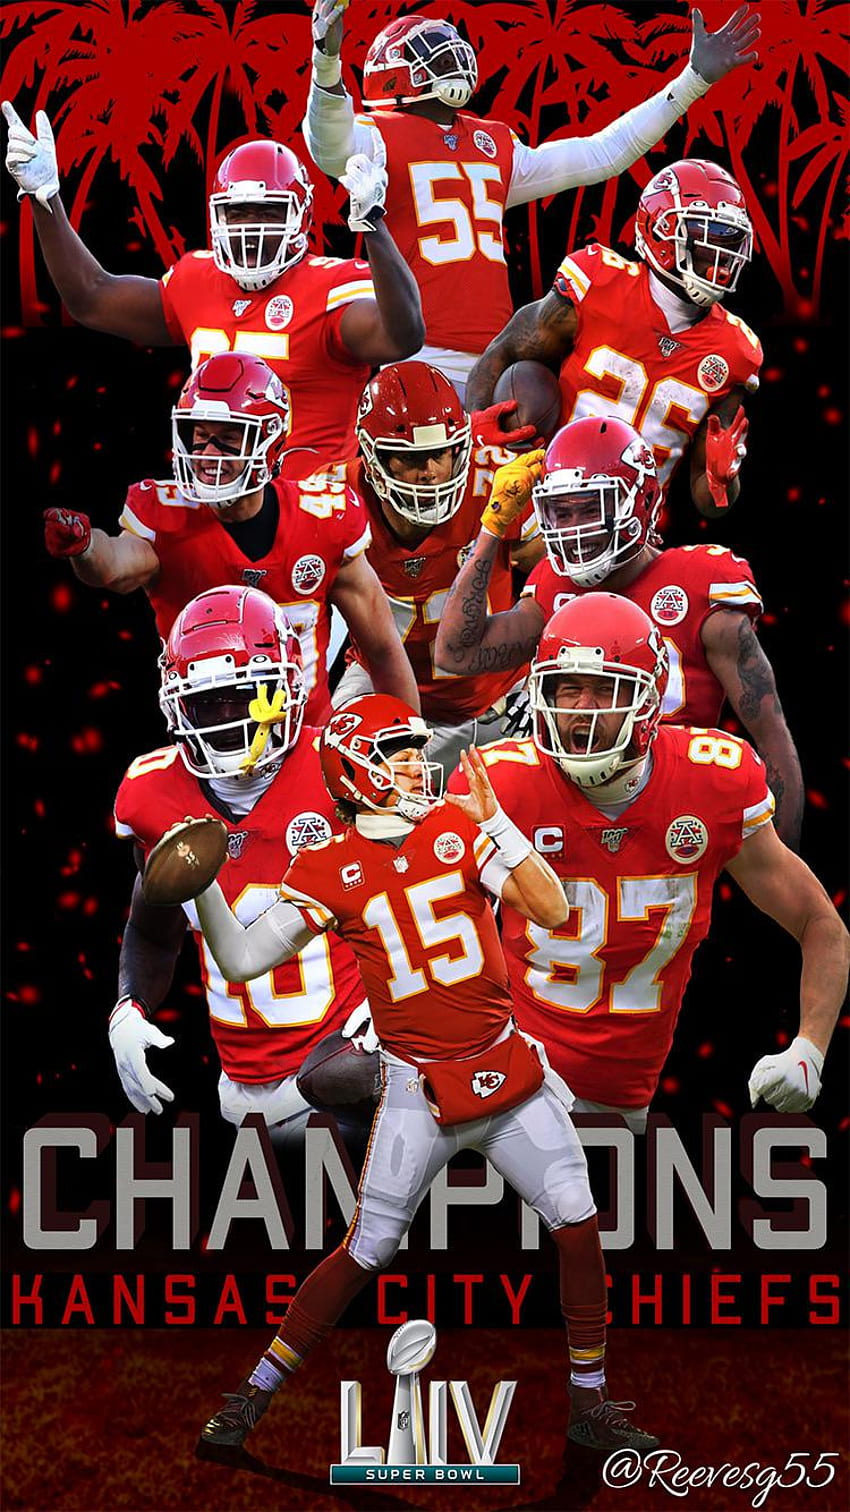 1920X1080Px, 1080P Free Download | For Chiefs Fans! : Kansascitychiefs